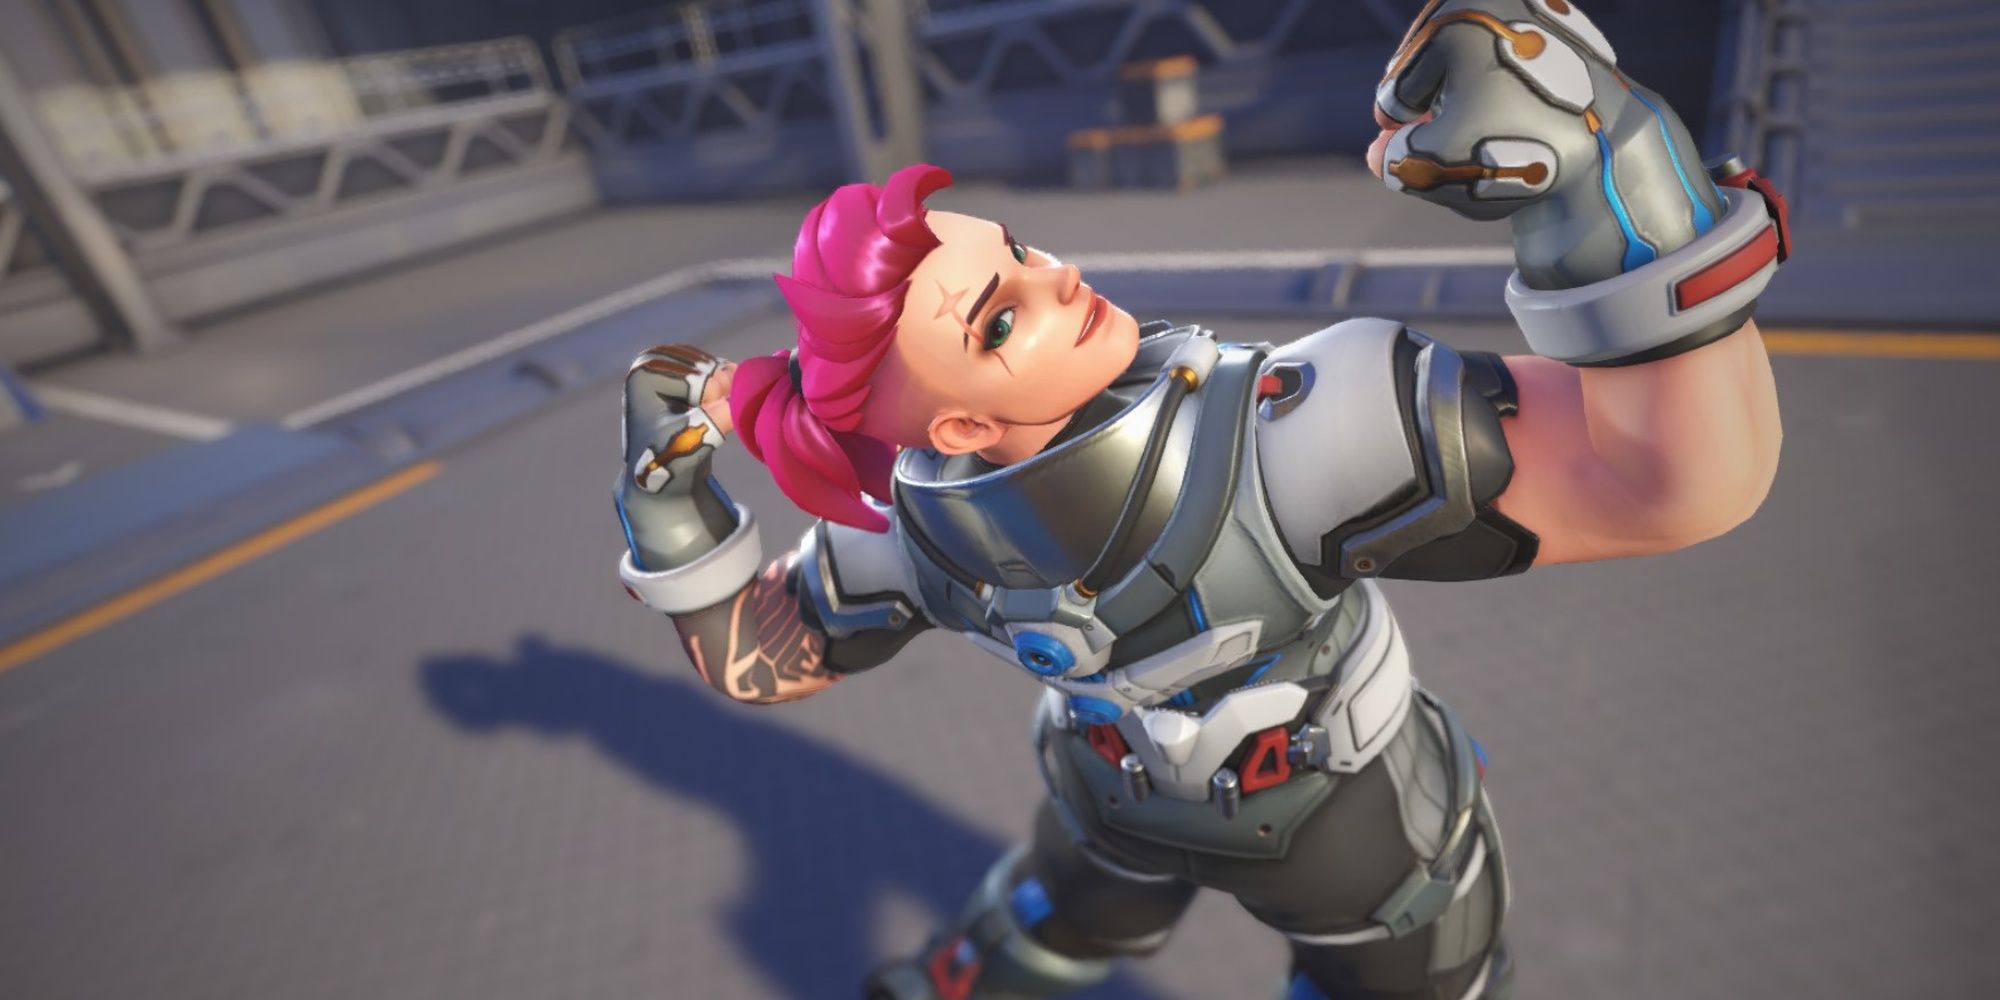 Zarya from Overwatch 2 Flexes with her back to the camera.